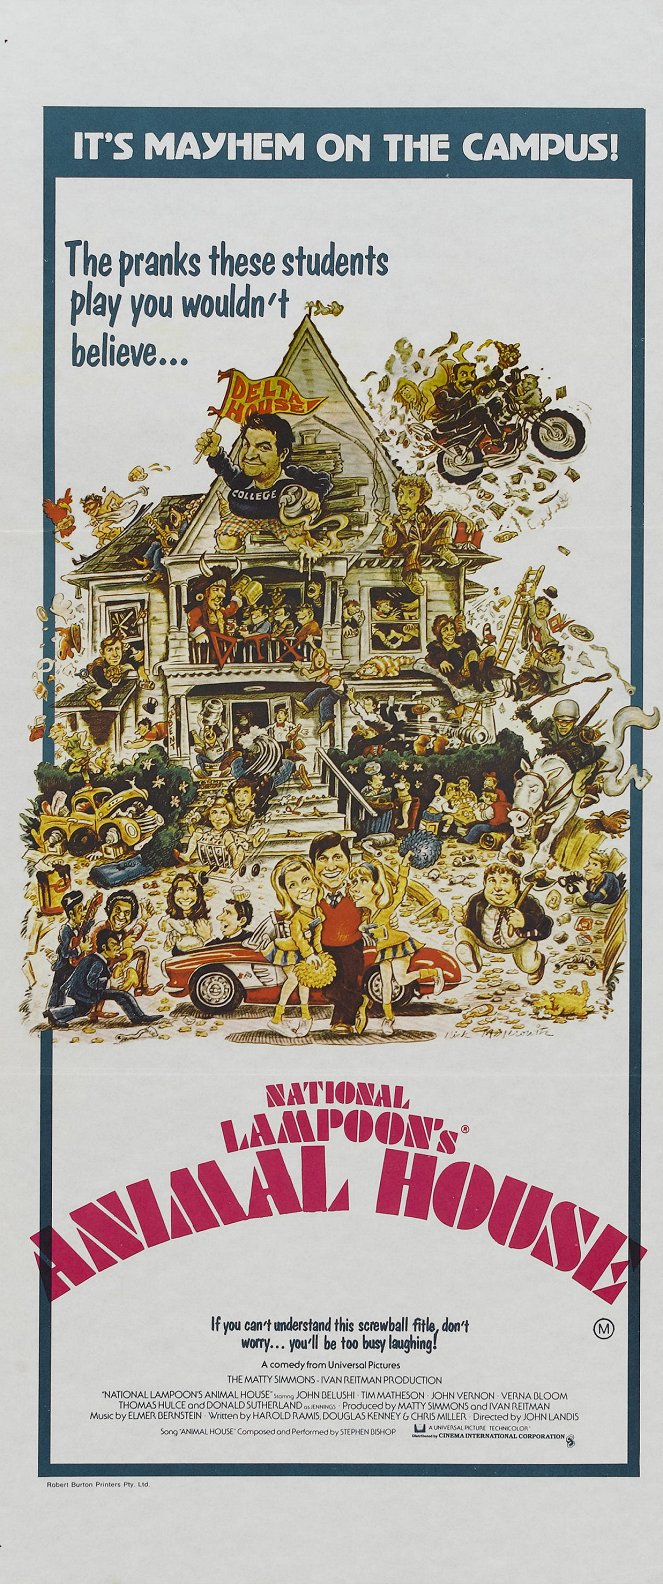 Animal House - Posters